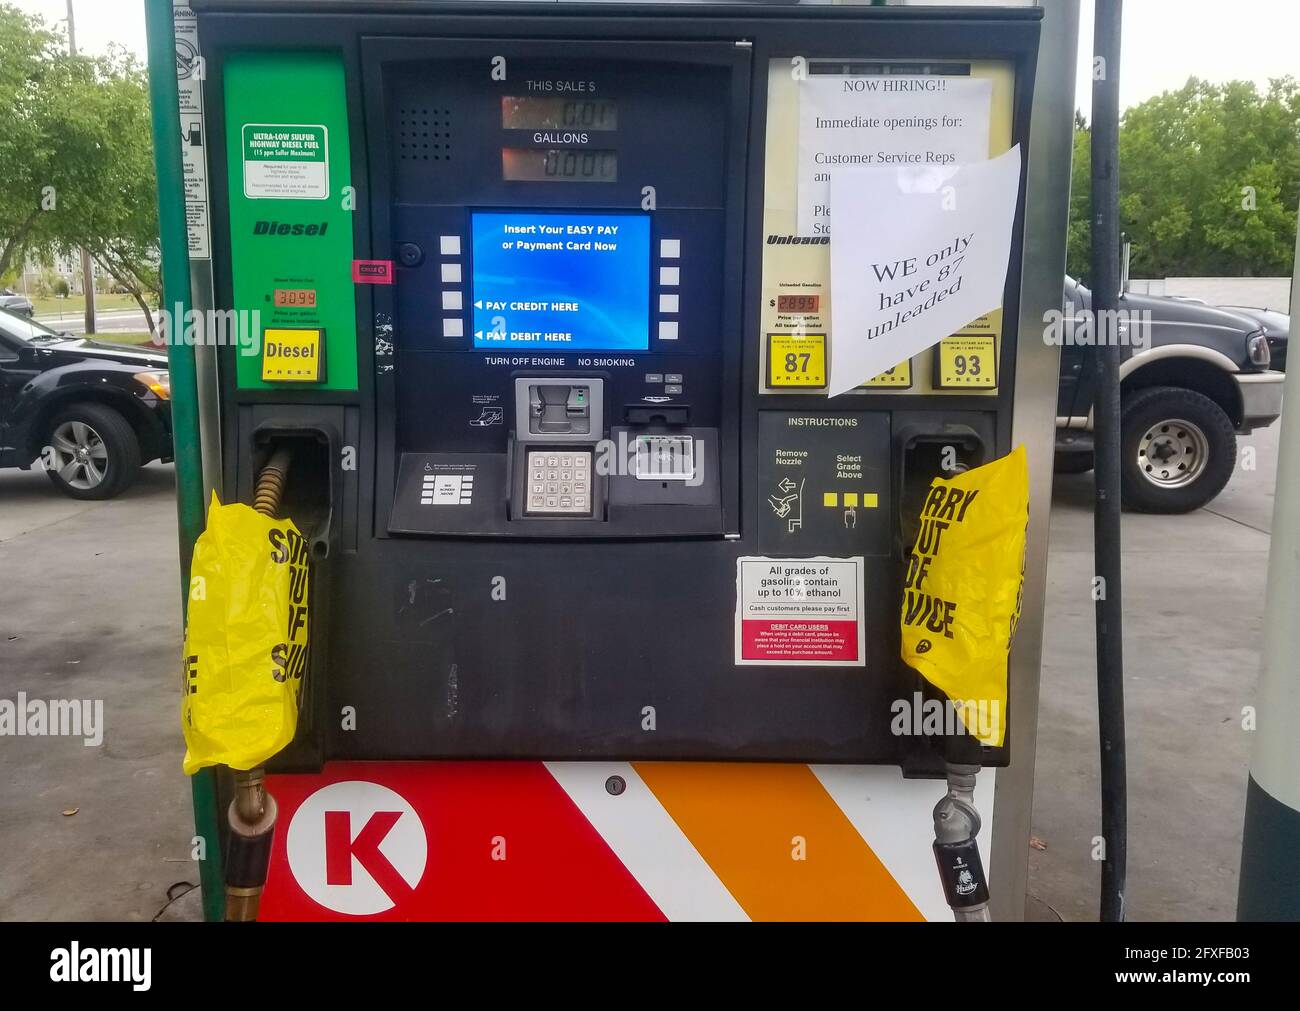 CONCORD, NC, UNITED STATES - May 13, 2021: Circle K Gas Station during the Gas Shortage of 2021. Pump is out of gas with yellow bags covering pumps. Stock Photo